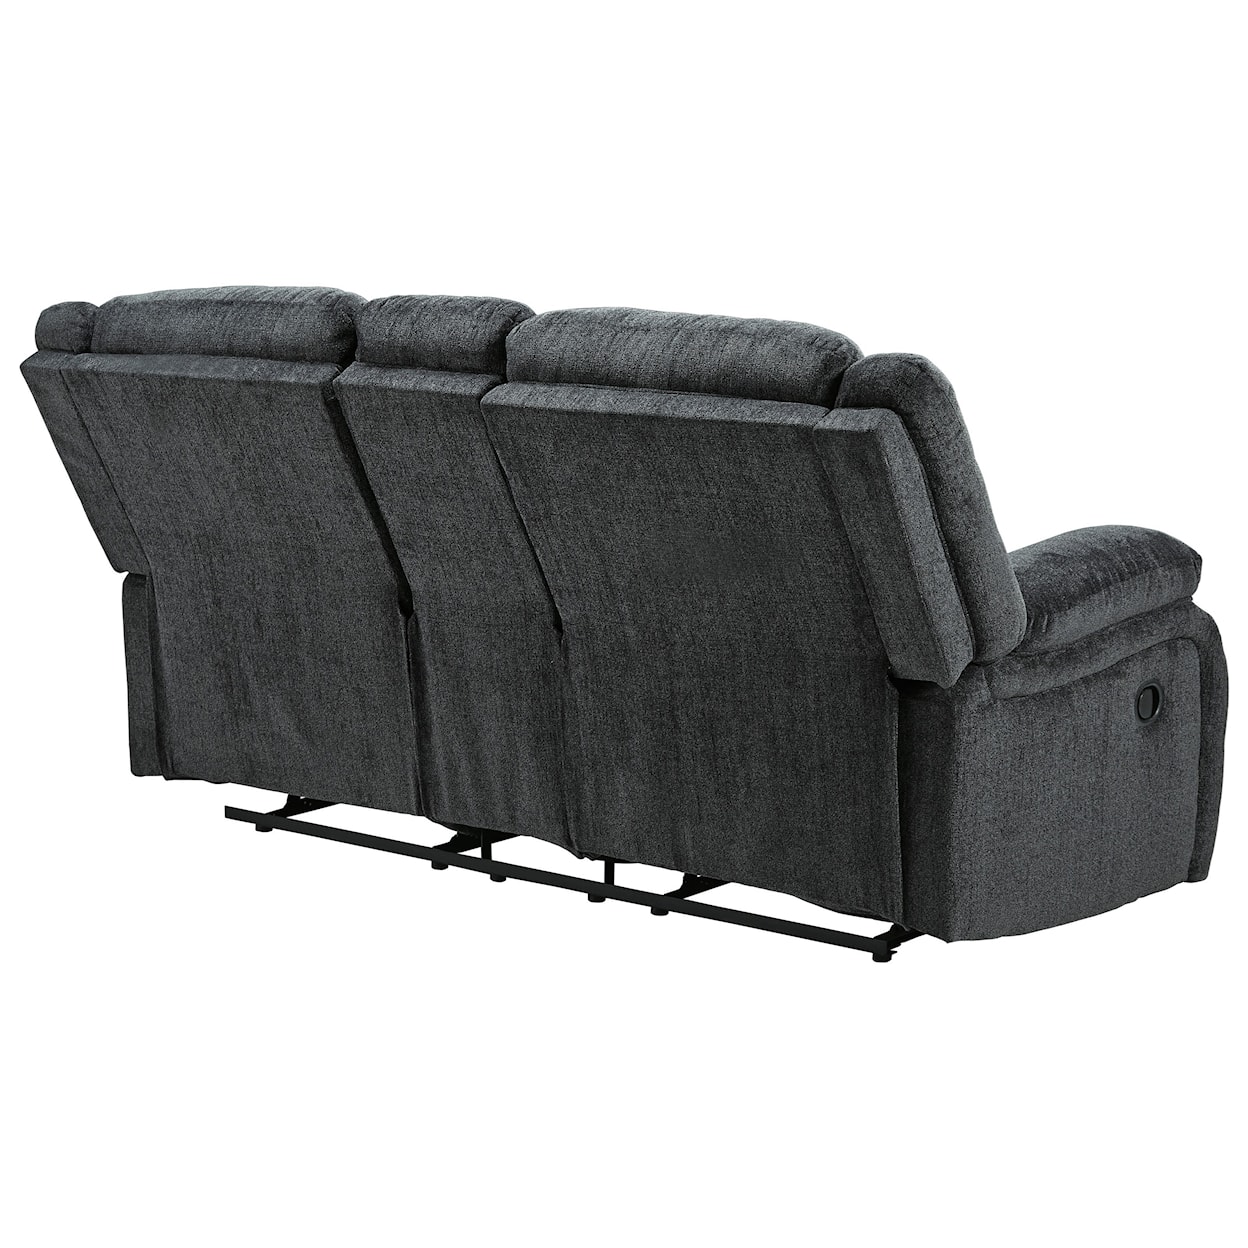 Signature Design Draycoll Double Reclining Loveseat w/ Console